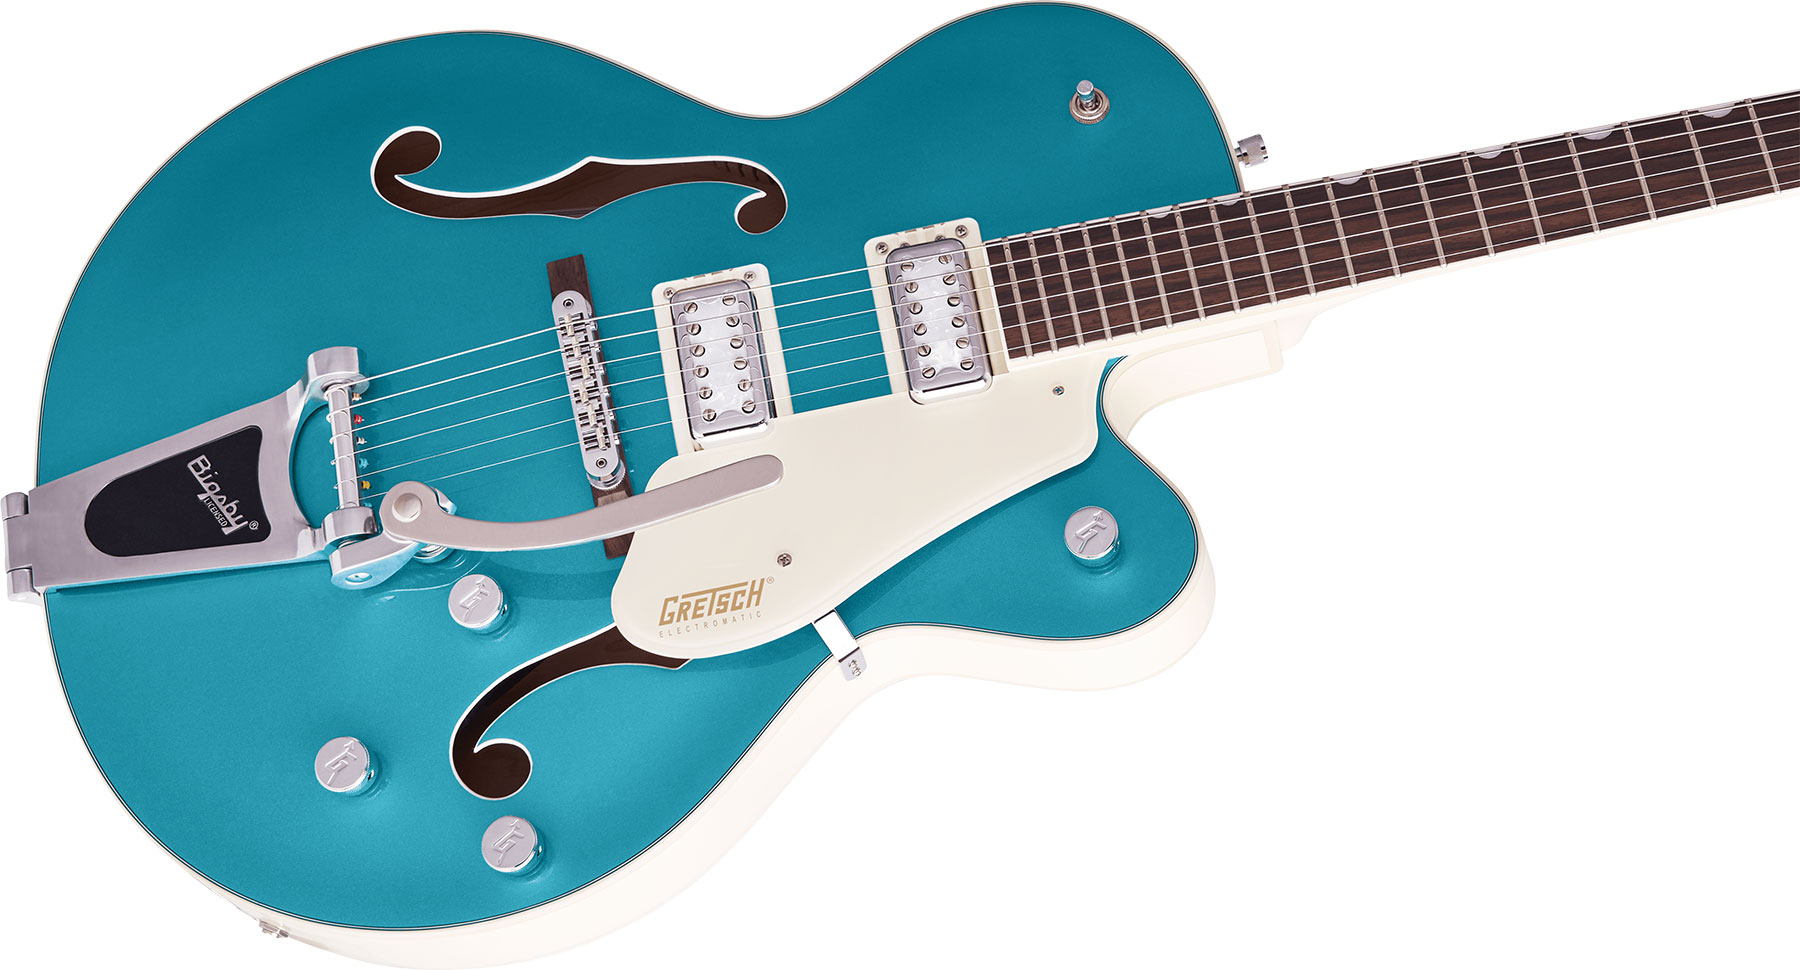 Gretsch G5410t Tri-five Electromatic Hollow Hh Bigsby Rw - Two-tone Ocean Turquoise/vintage White - Semi-hollow electric guitar - Variation 2